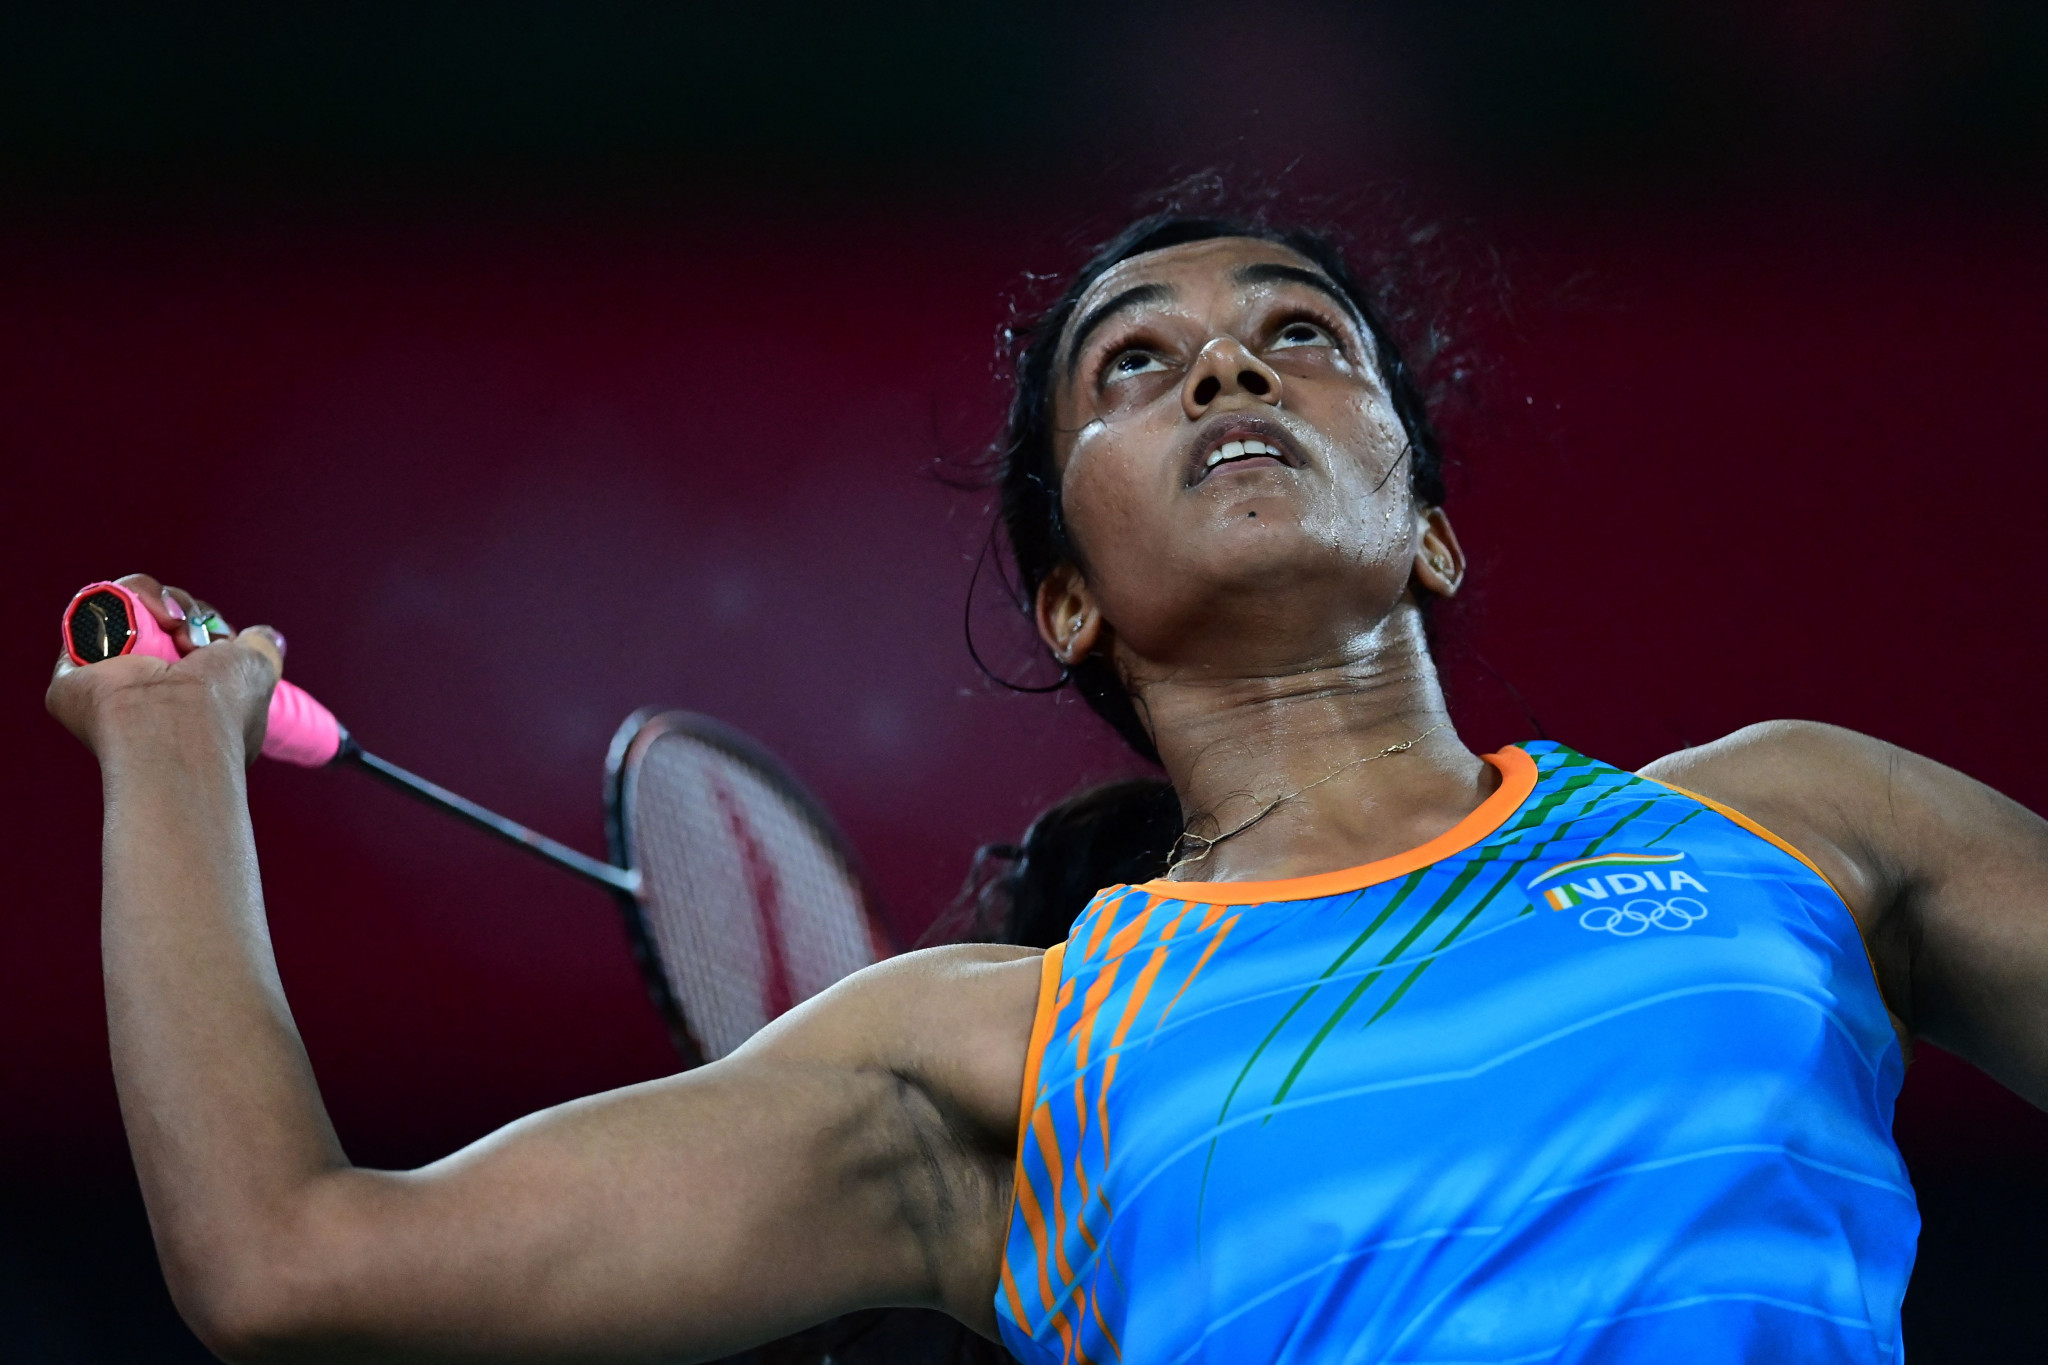 Top seed Tai to face defending champion Sindhu in last eight at Badminton World Championships